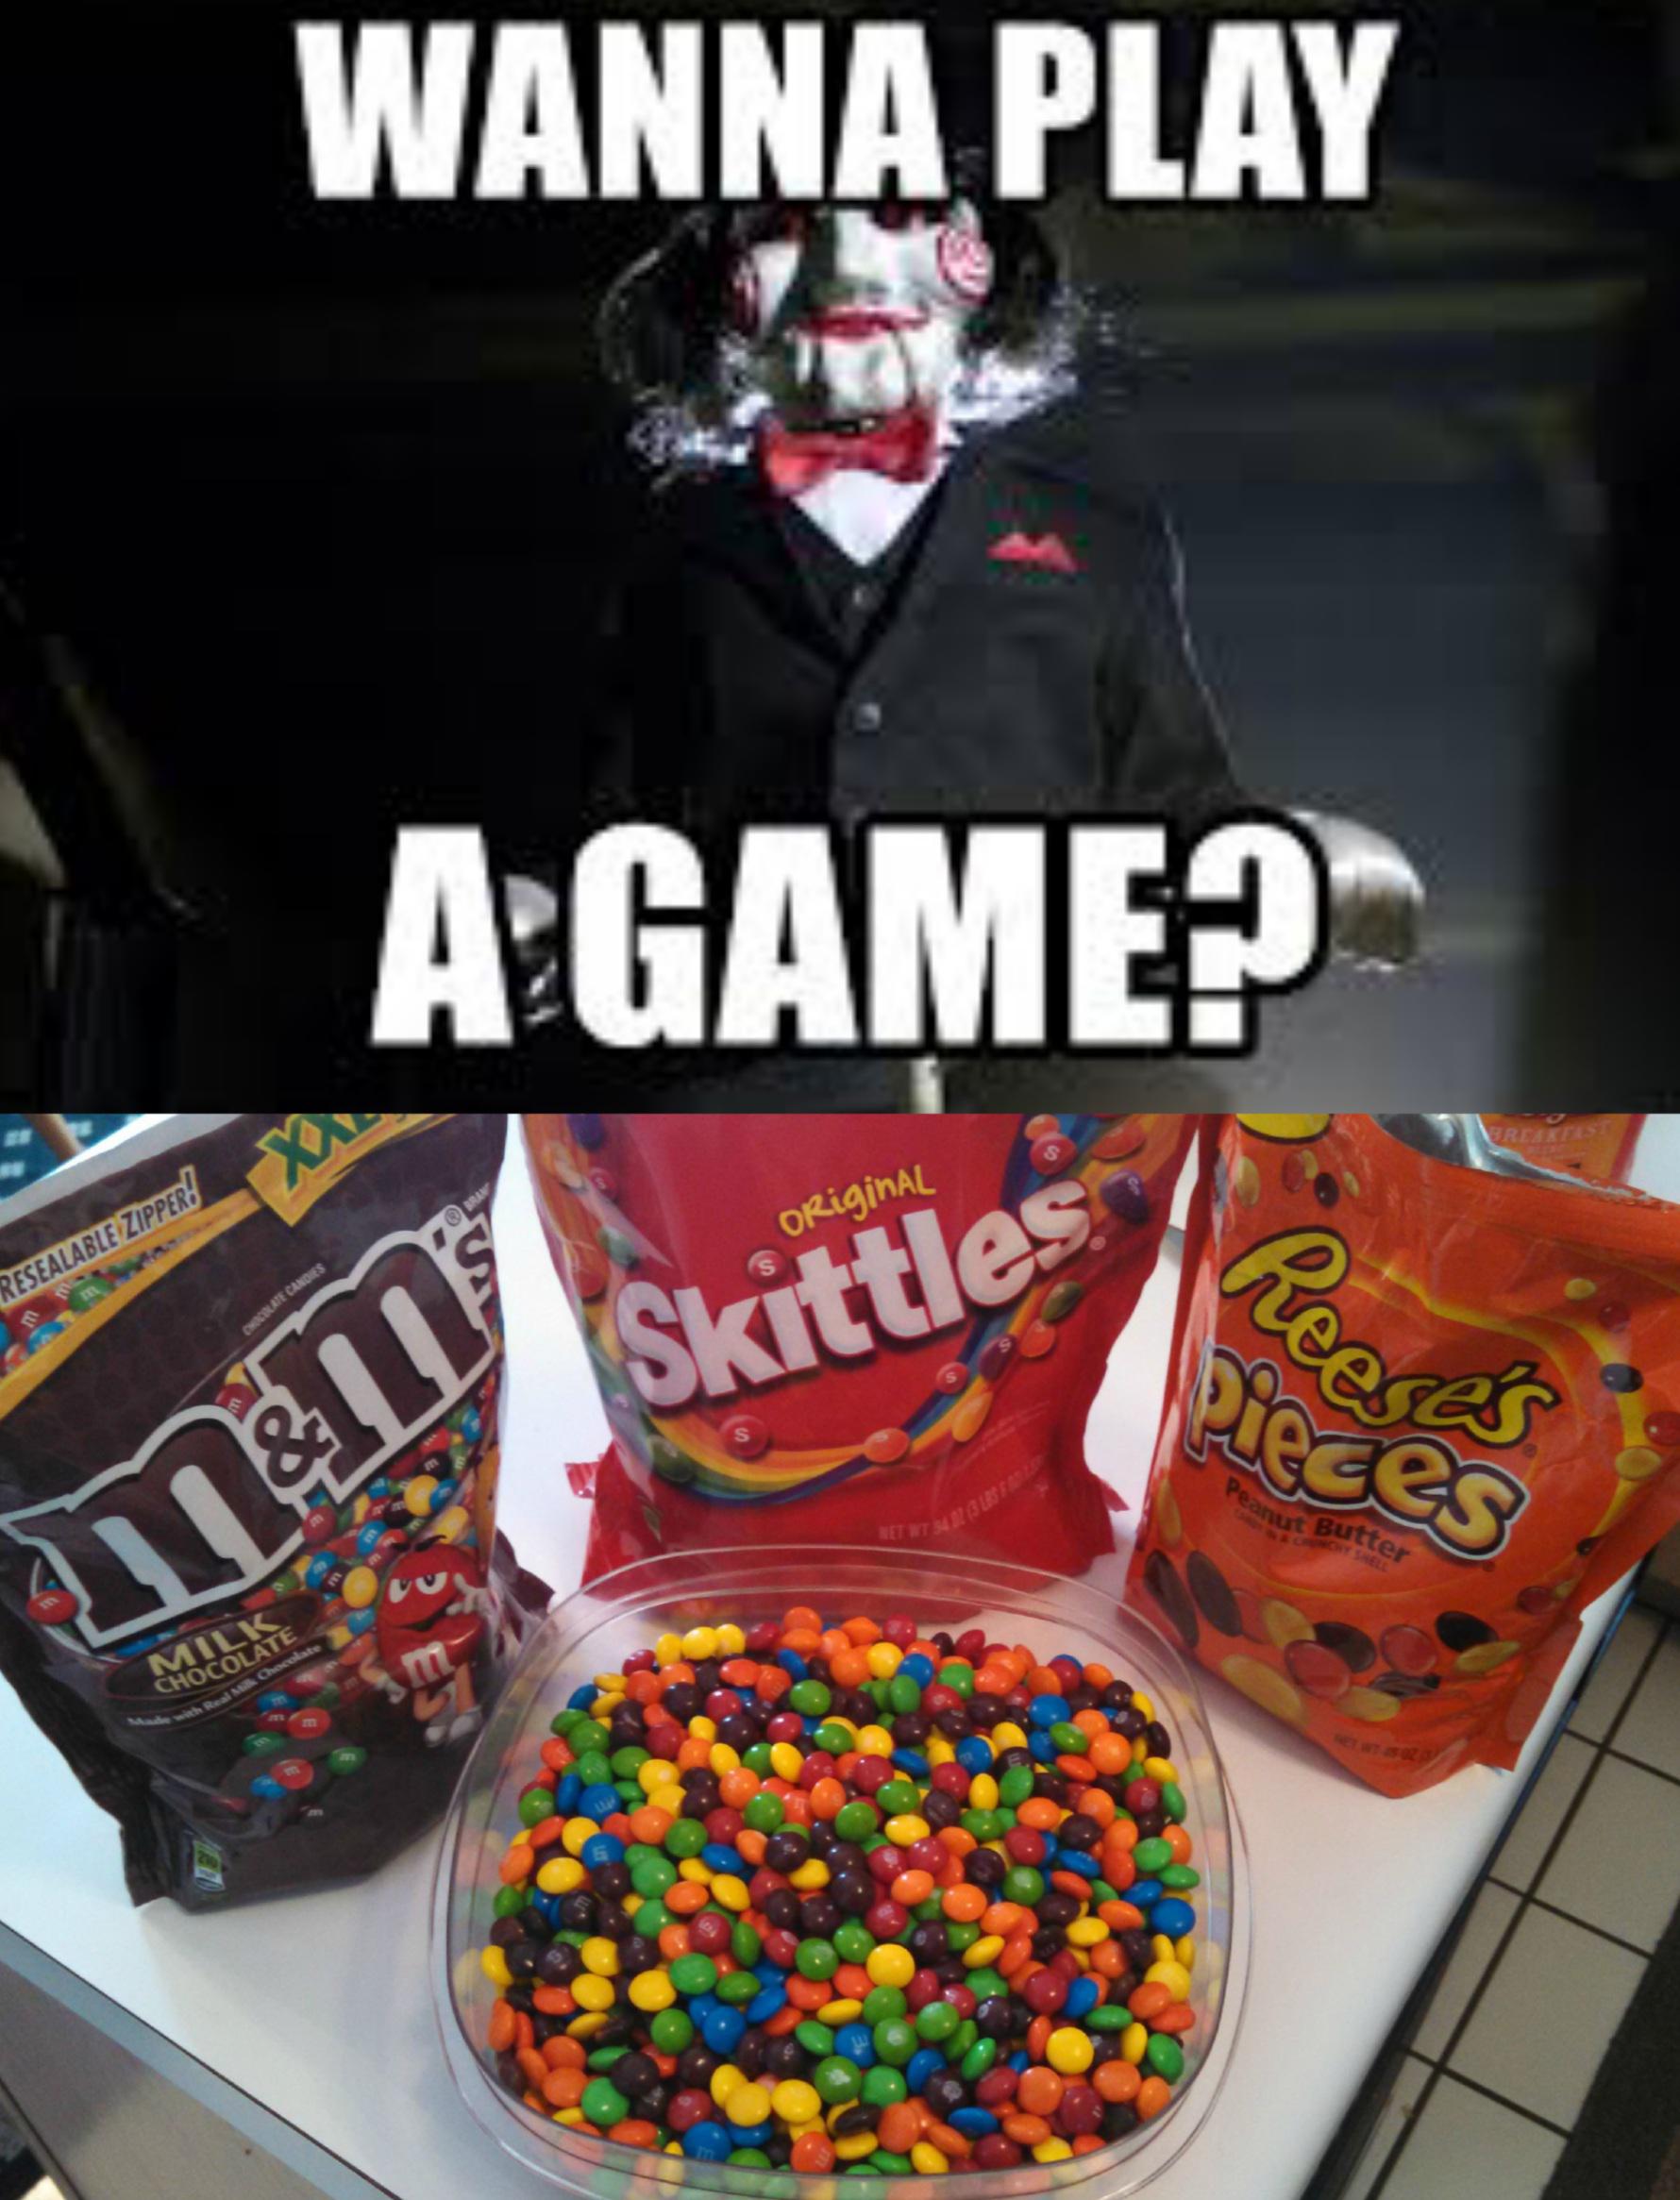 m&m skittles reese's pieces - Real Chocolate Wanna Play A Game? Bran Original Resealable Zipper! heeses Chorate Candies y Skittles Pieces Peanut Butter Milk Chocolate